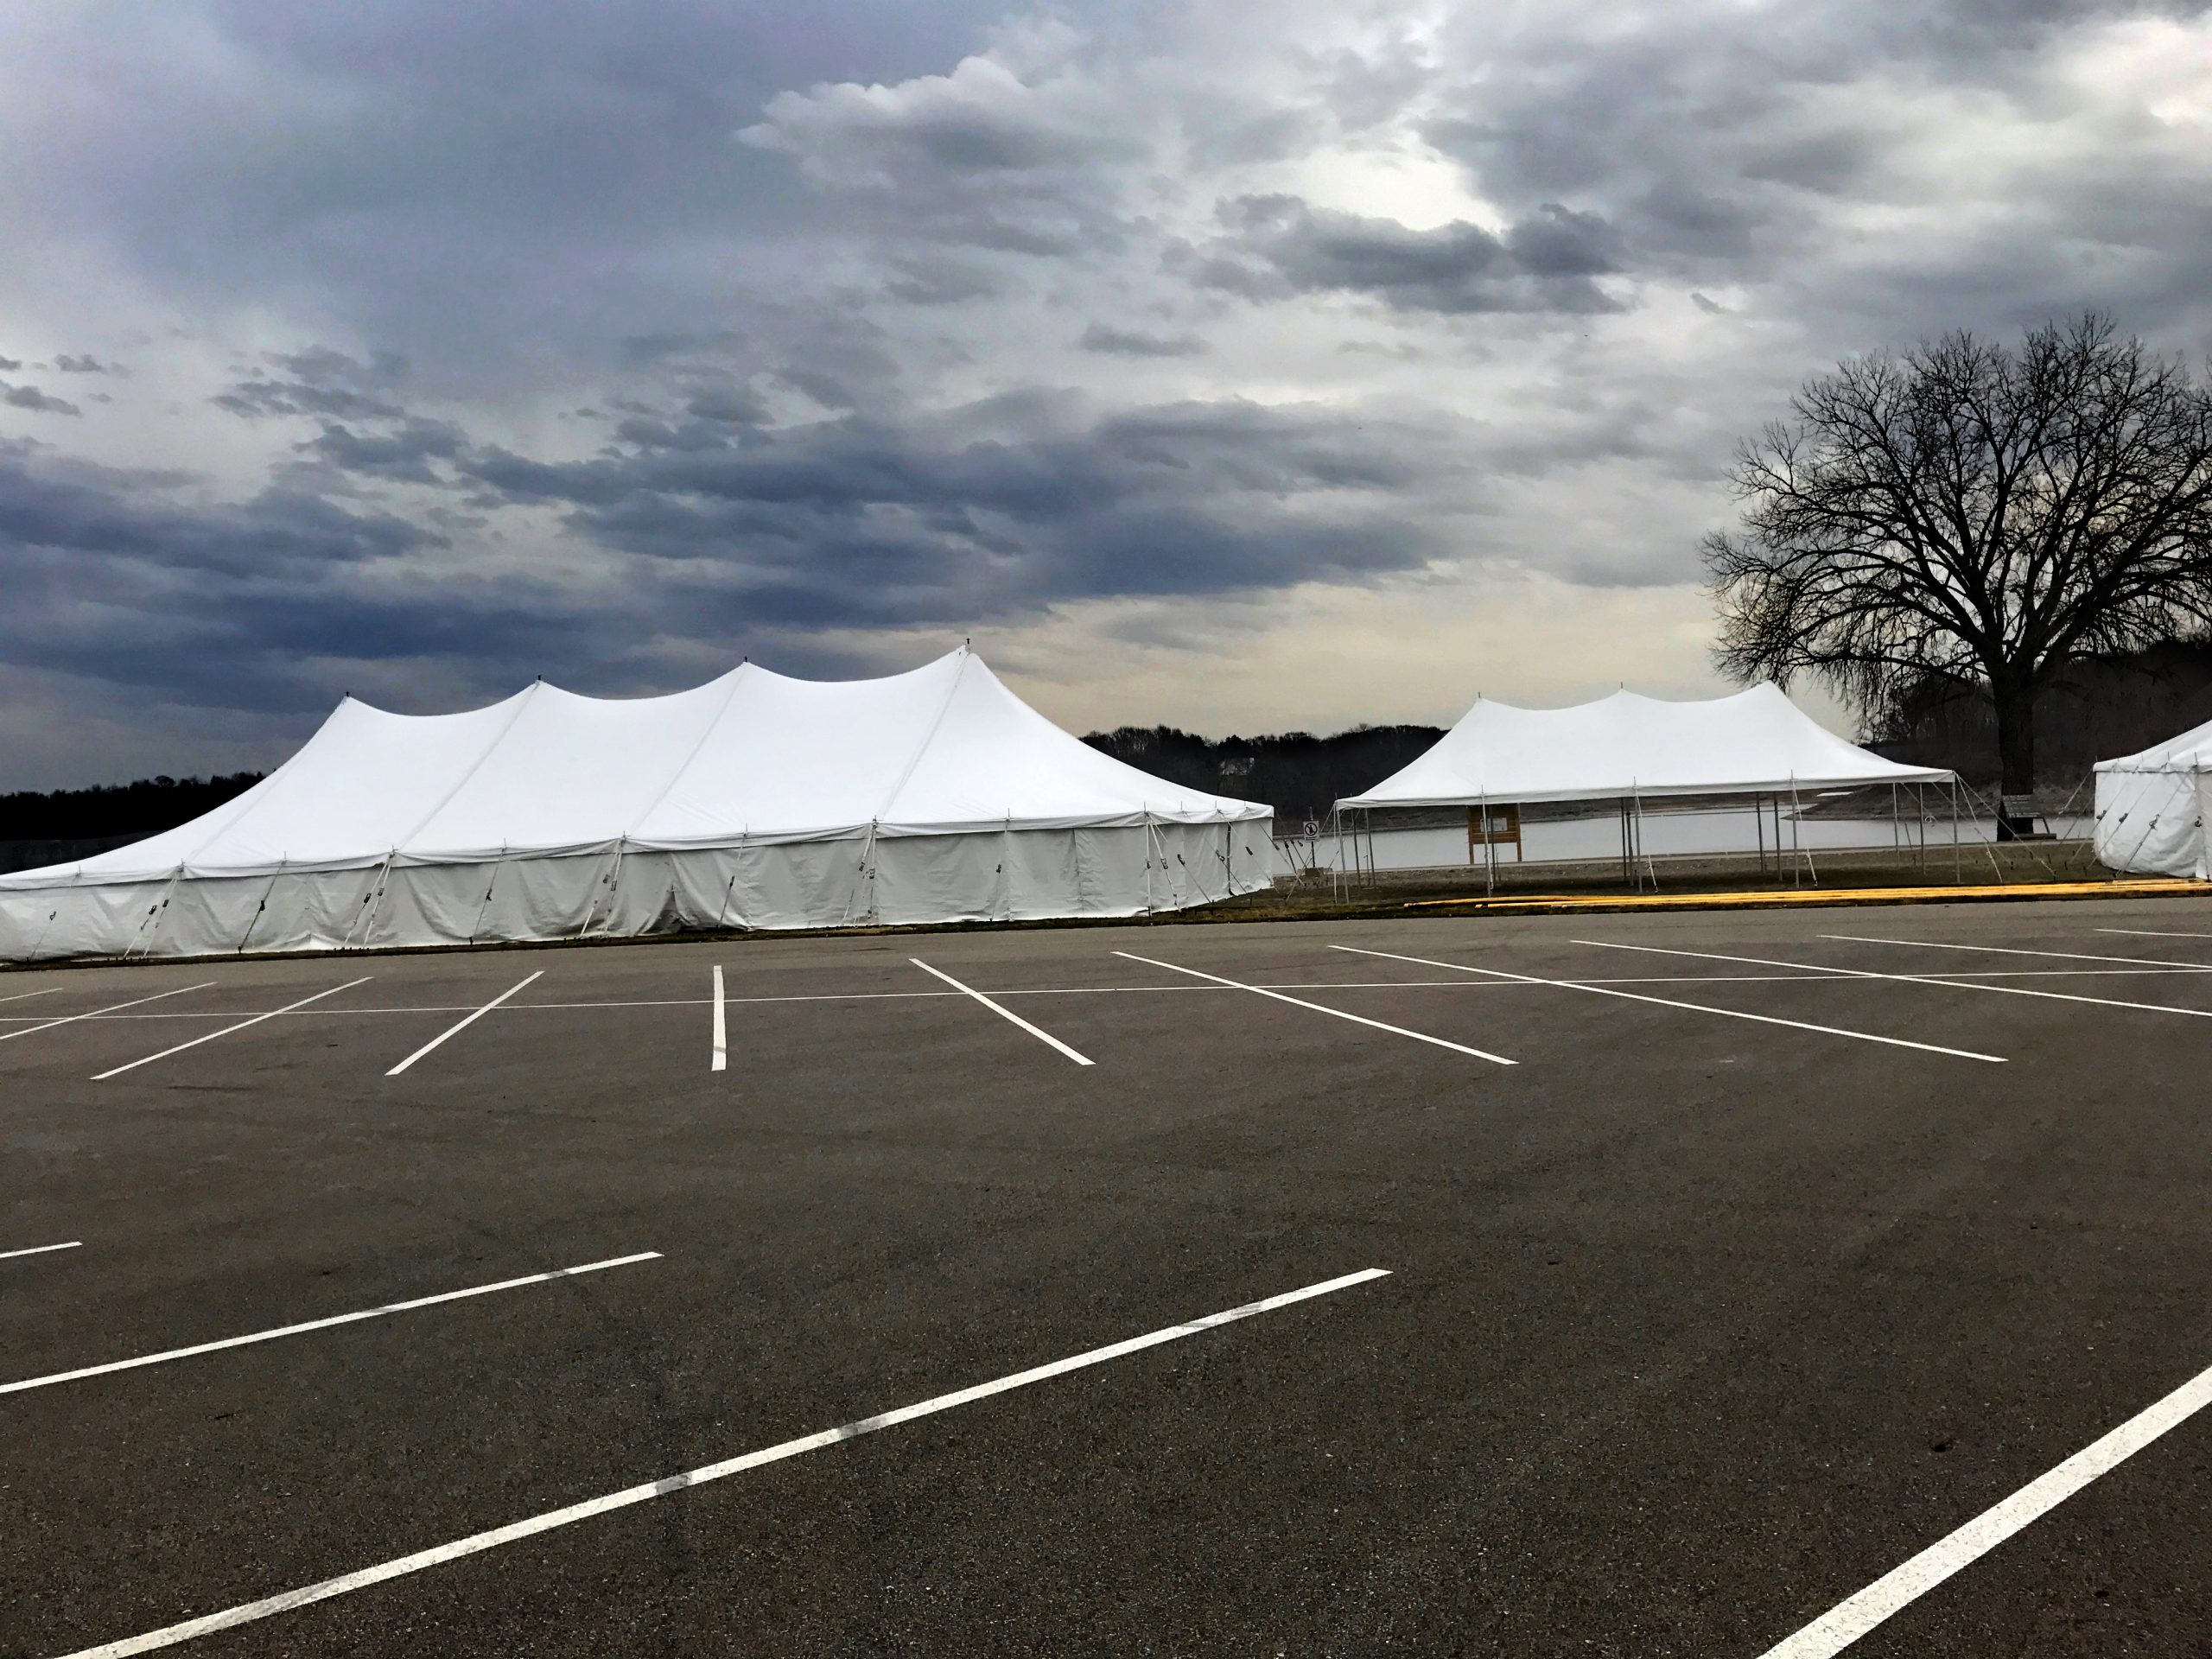 40' x 100' Elite rope and pole tent (left), 20' x 40' rope and pole tent (middle), 30' x 60' rope and pole tent (right) for Special Olympics Polar Plunge